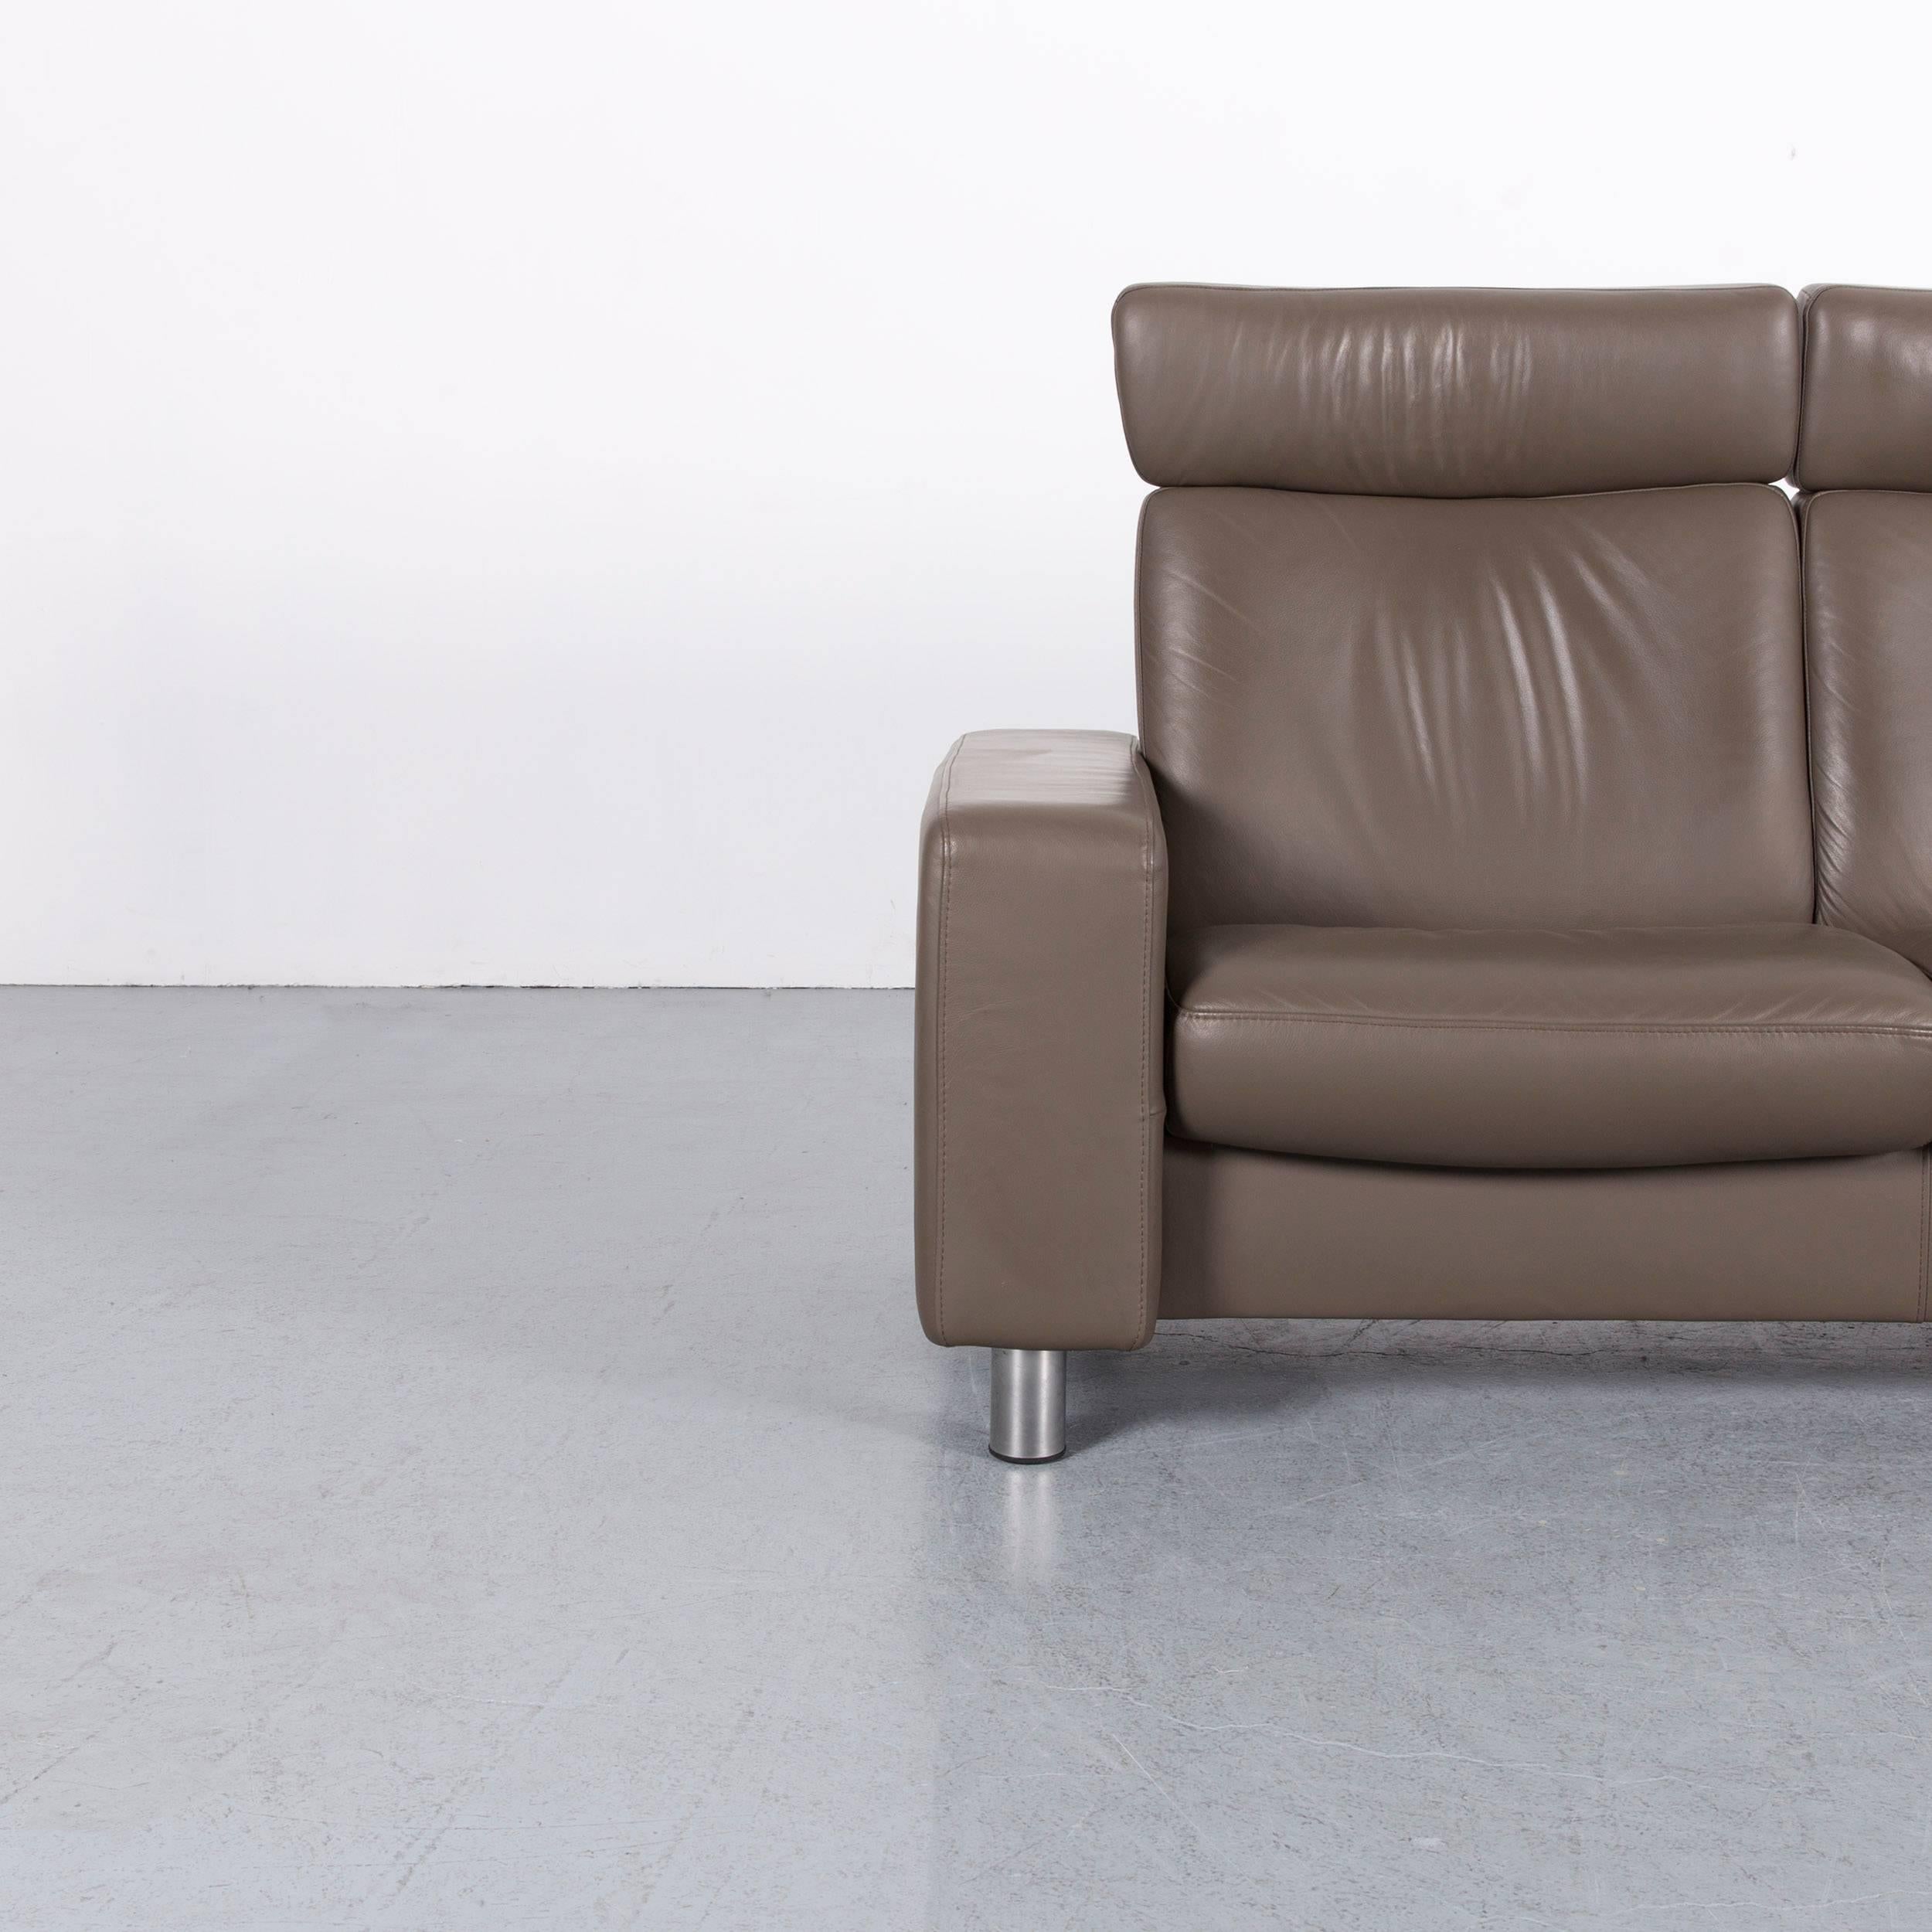 We bring to you an Ekornes Stressless sofa brown leather two-seat recliner.
















       